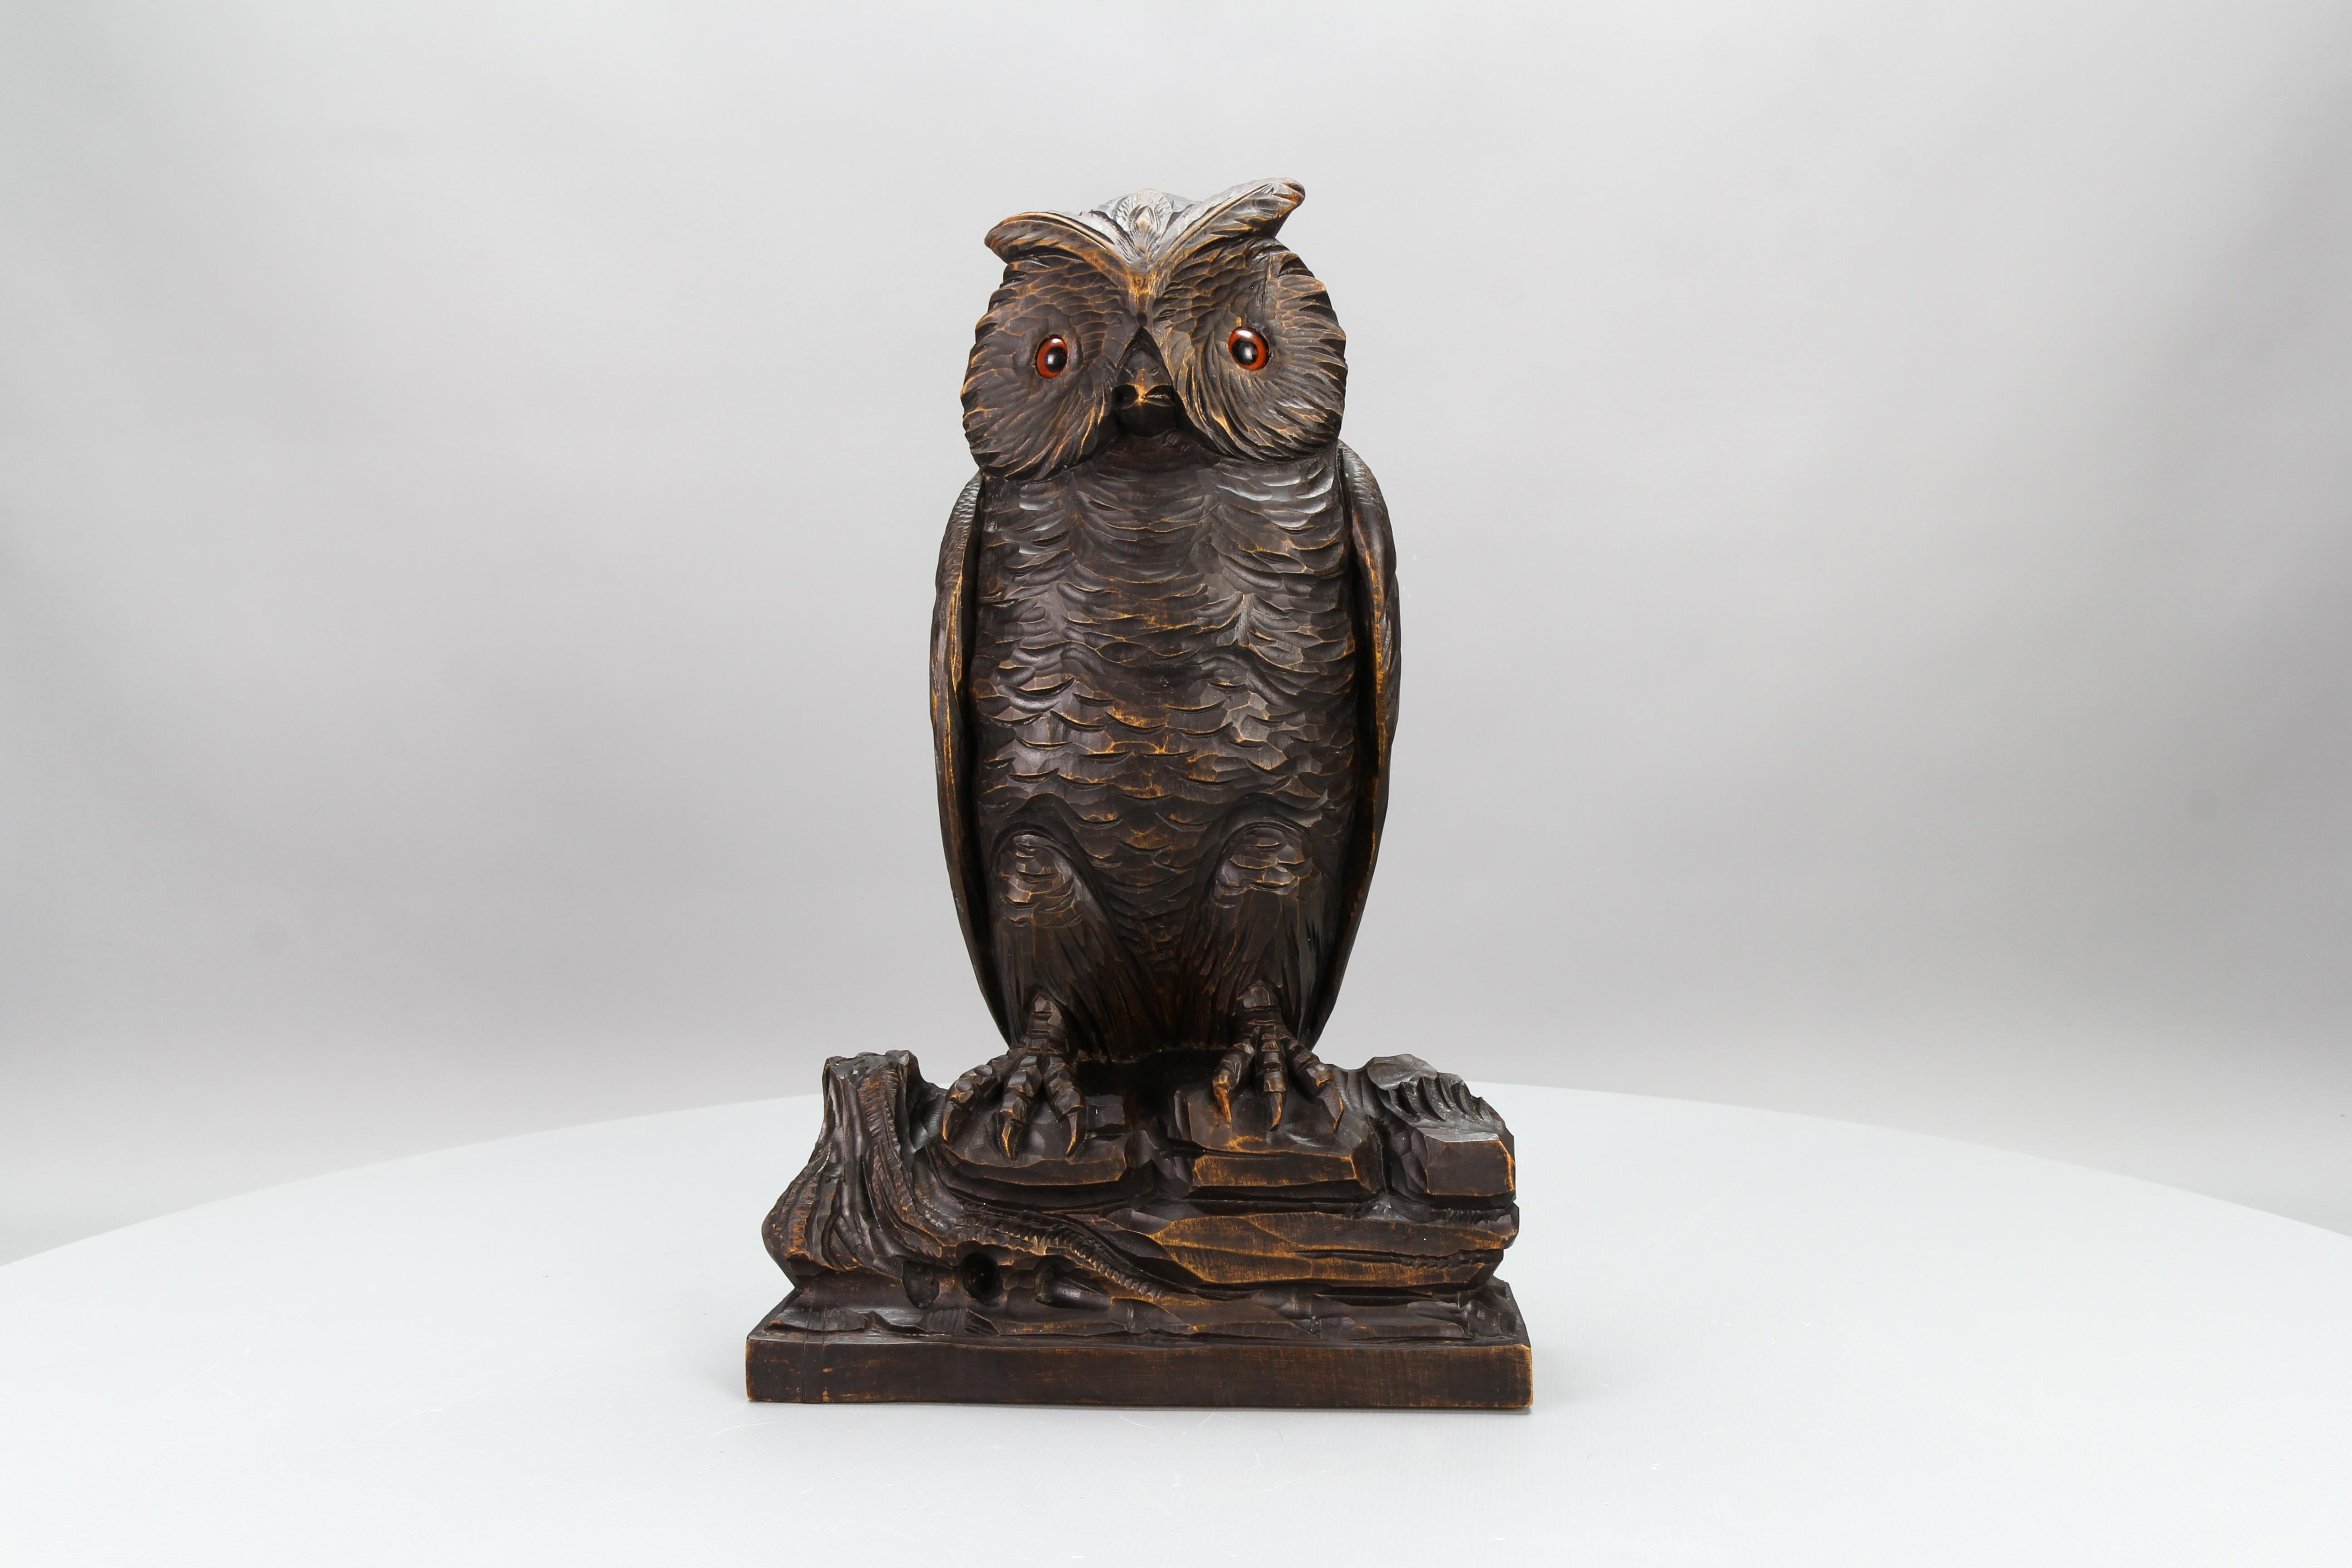 Antique German Black Forest Style Carved Owl Sculpture with Glass Eyes, ca. 1920 For Sale 6